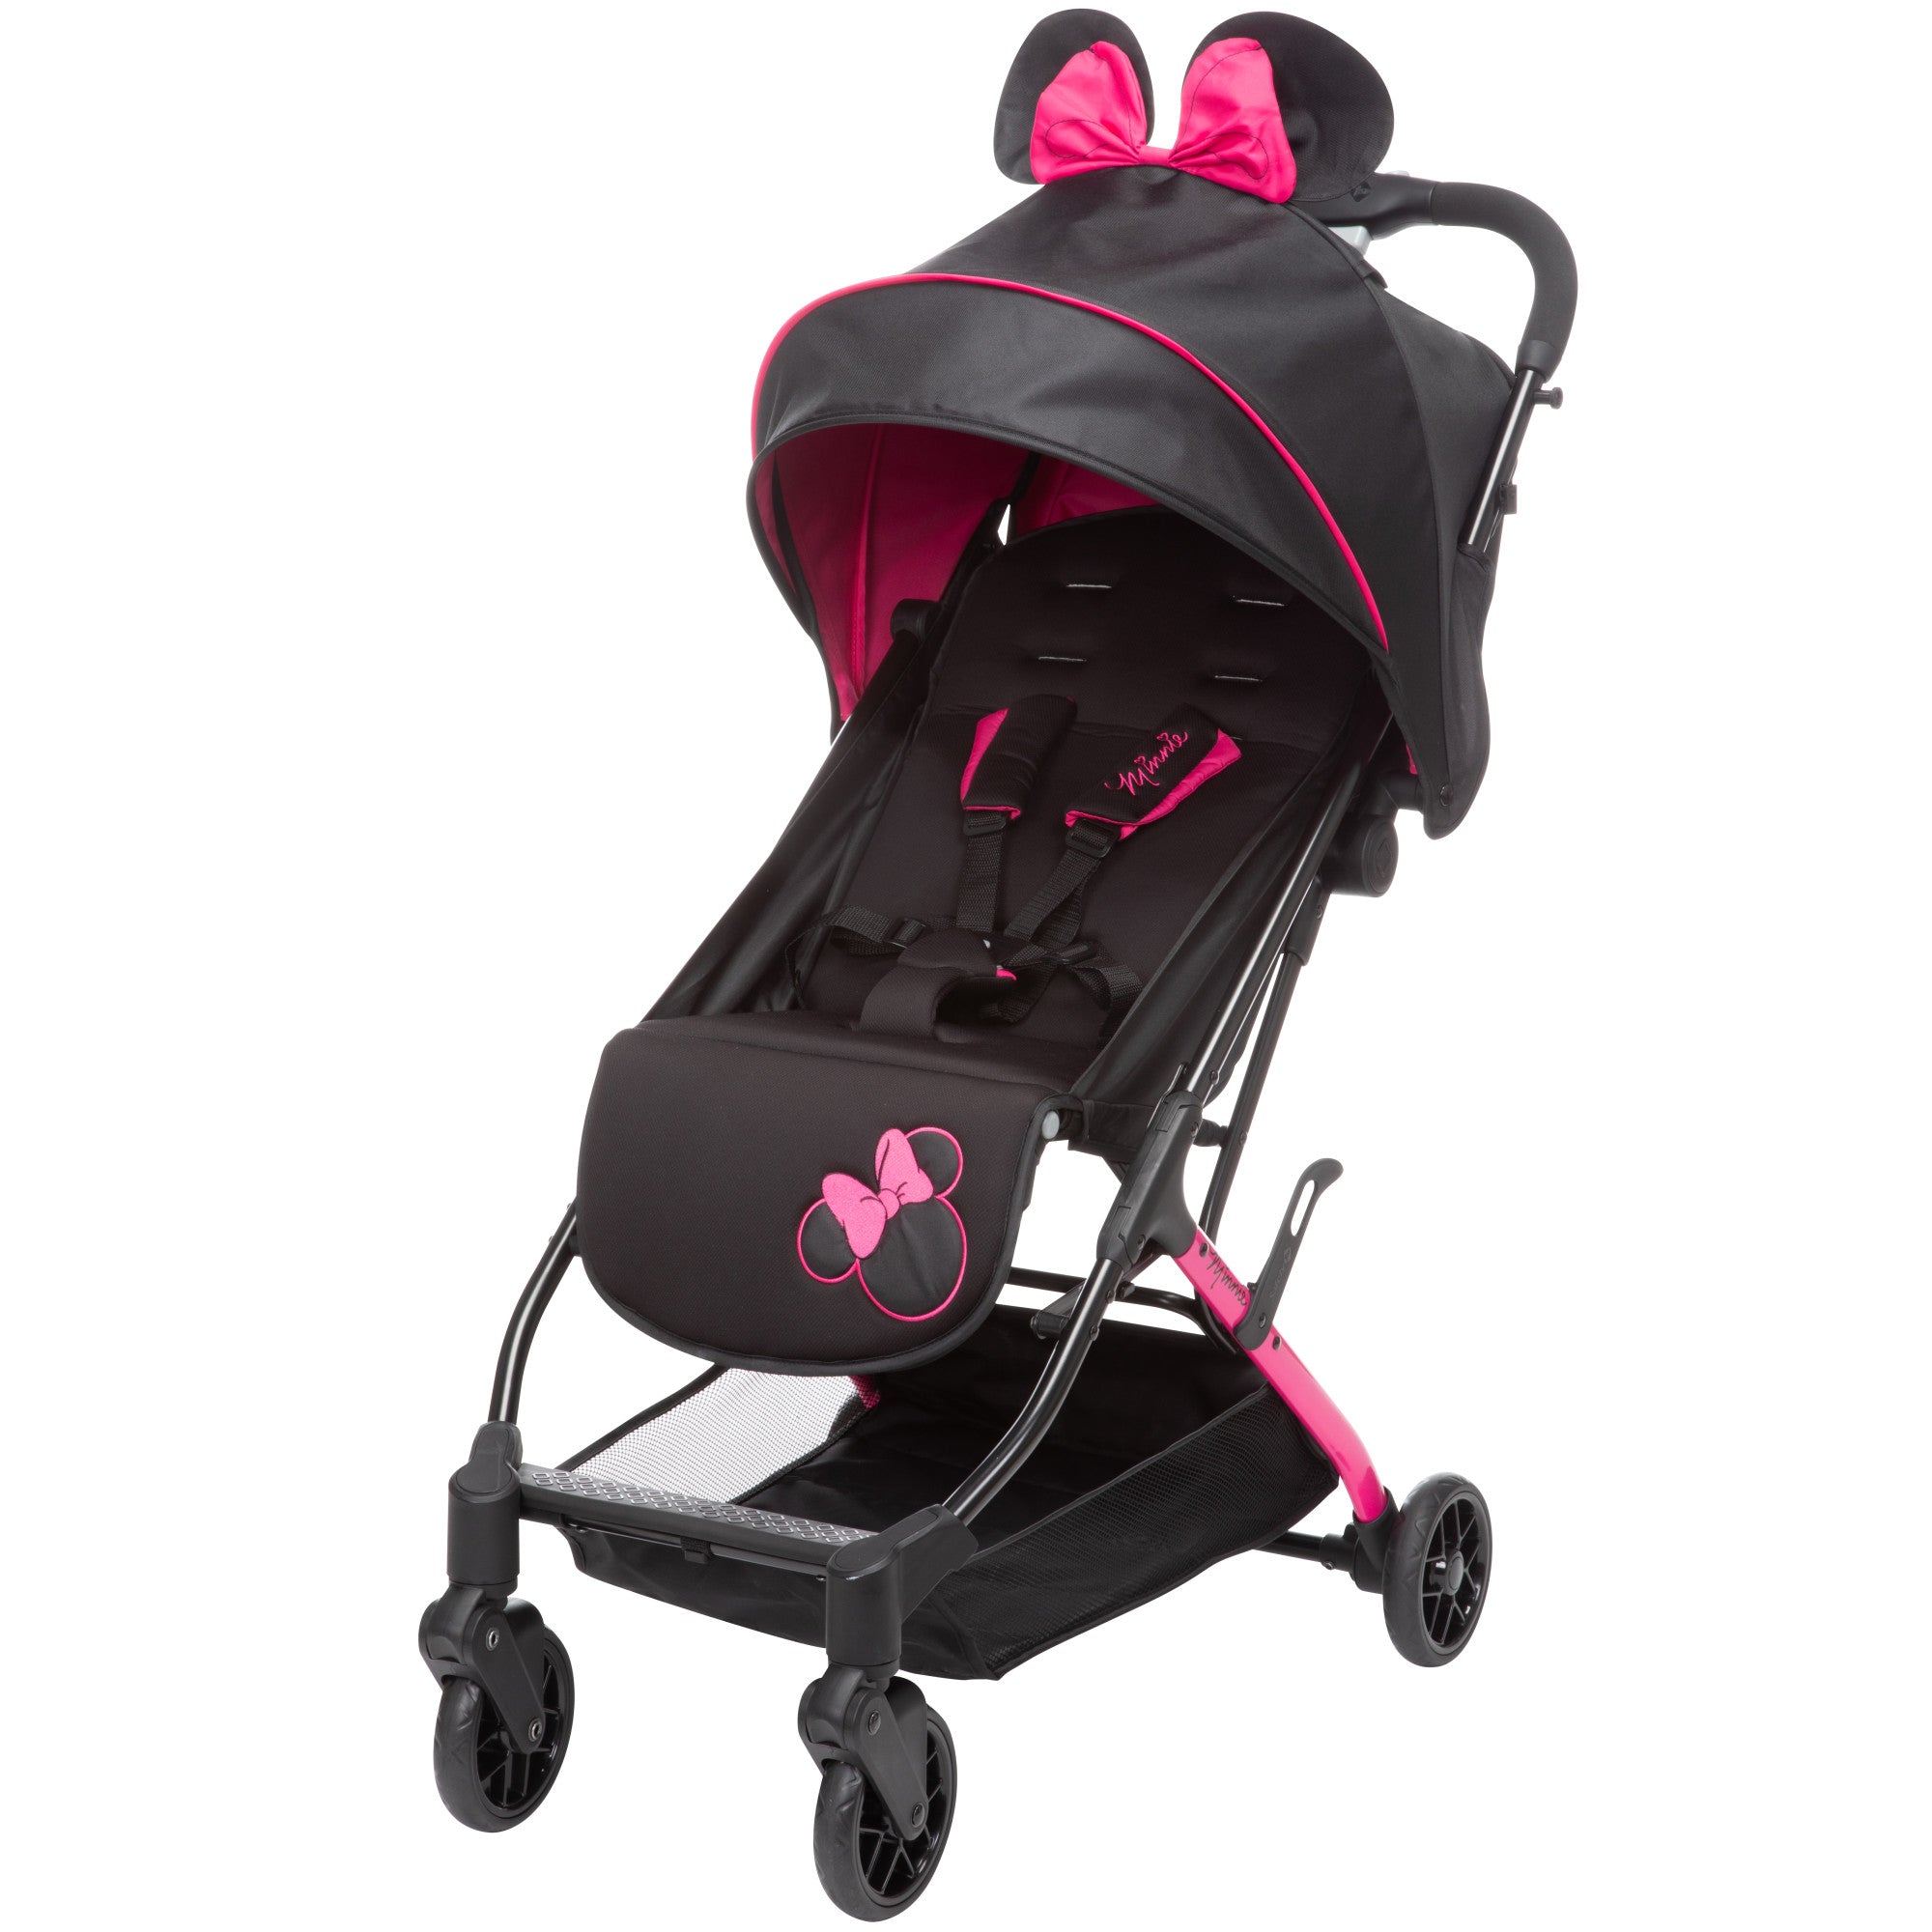 Disney Baby Teeny Ultra Compact Stroller - Let's Go Minnie!